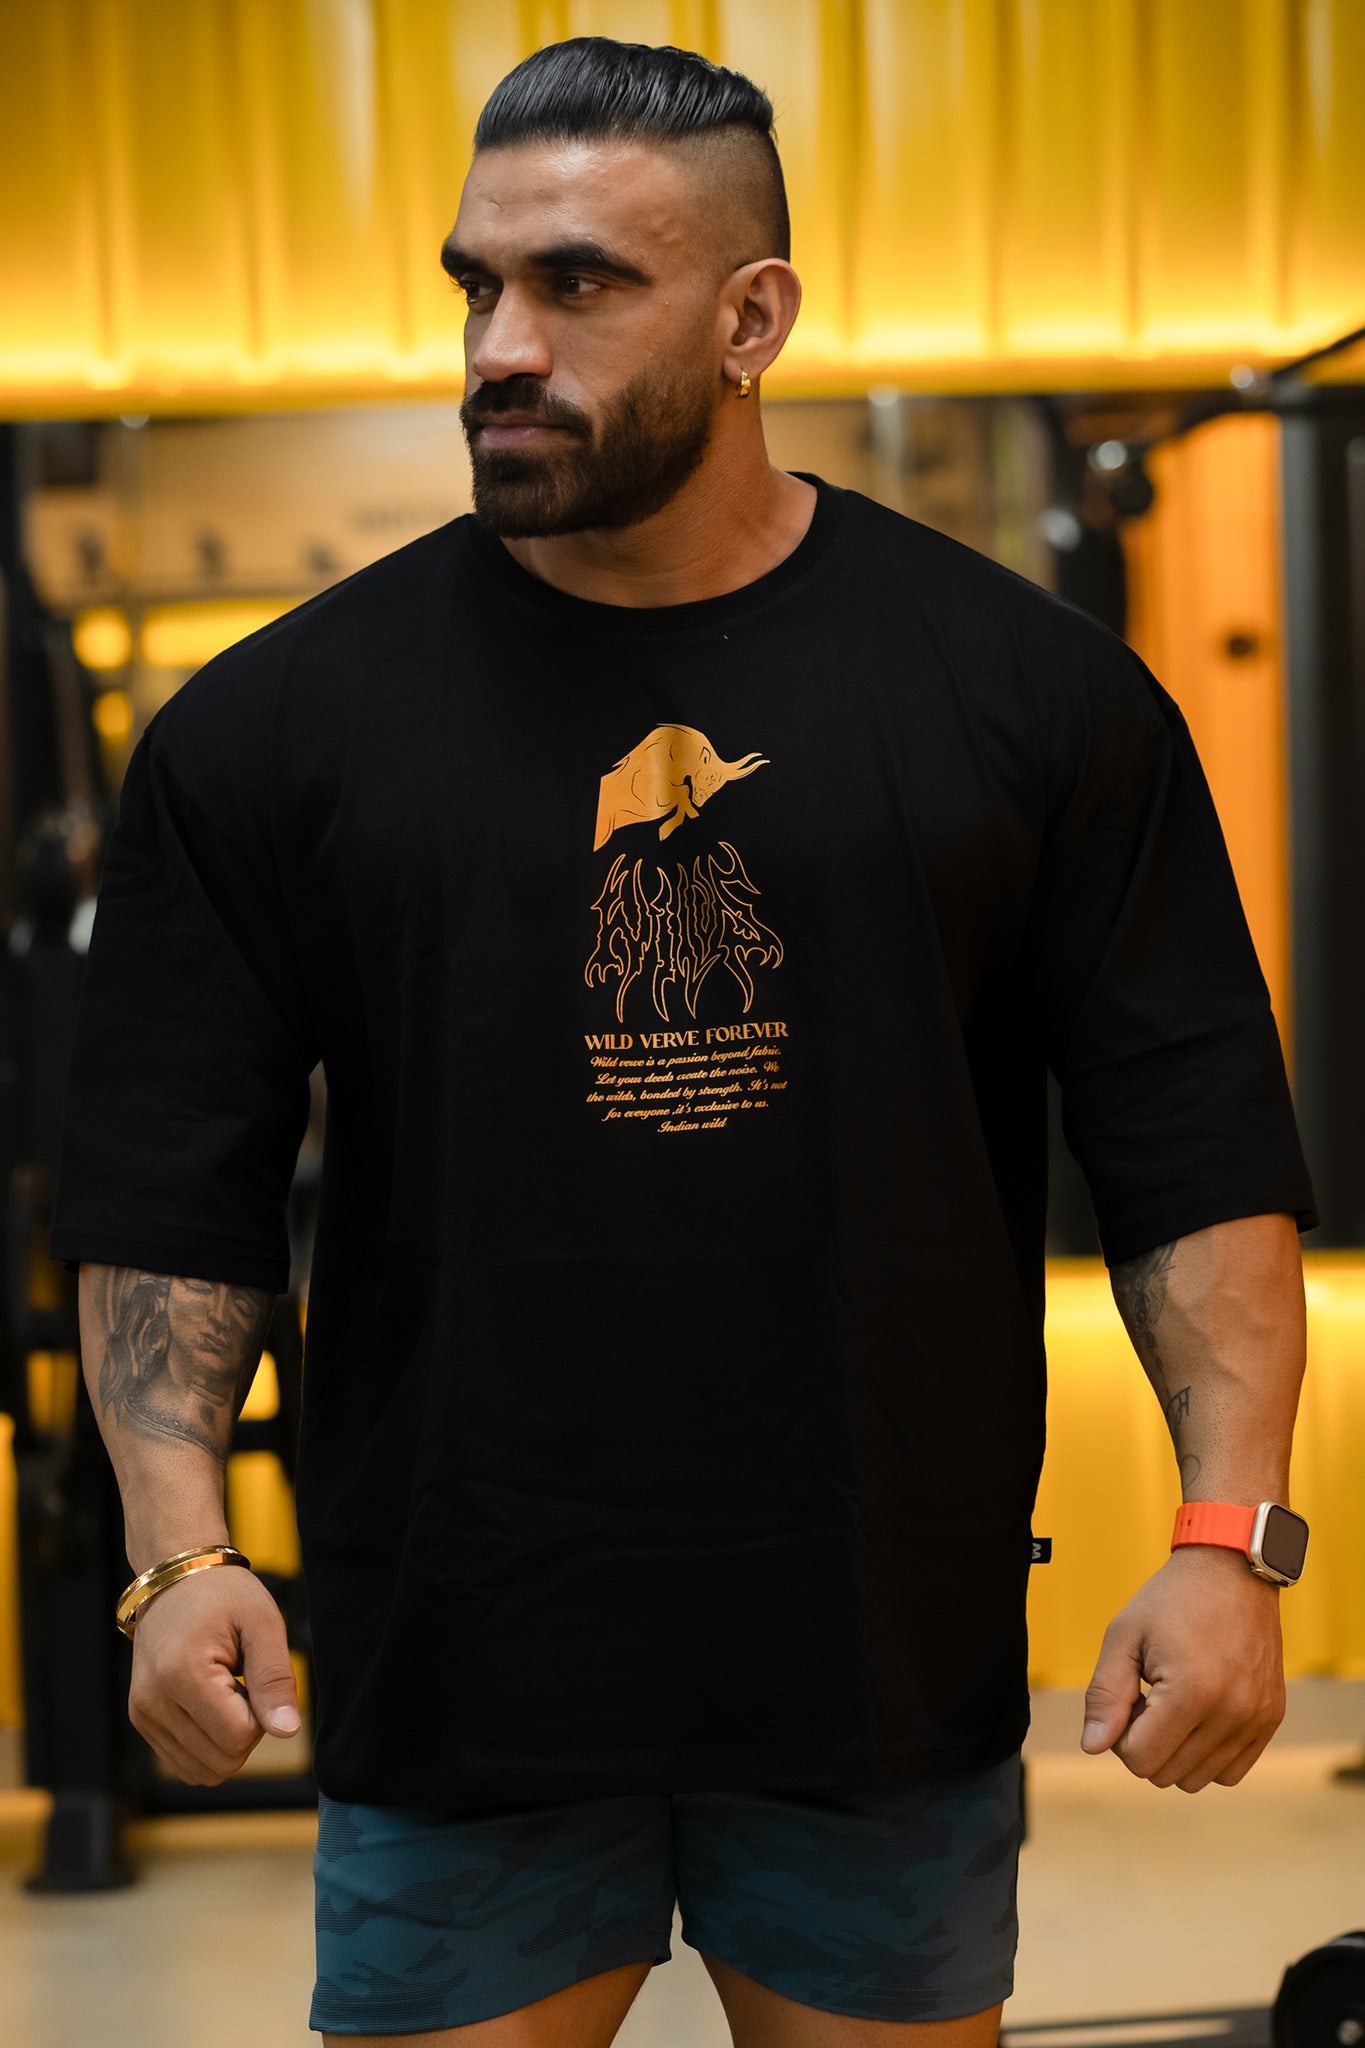 WILDS FLAME "PREMIUM" OVERSIZED T-SHIRT IN BLACK (GOLD PRINT)